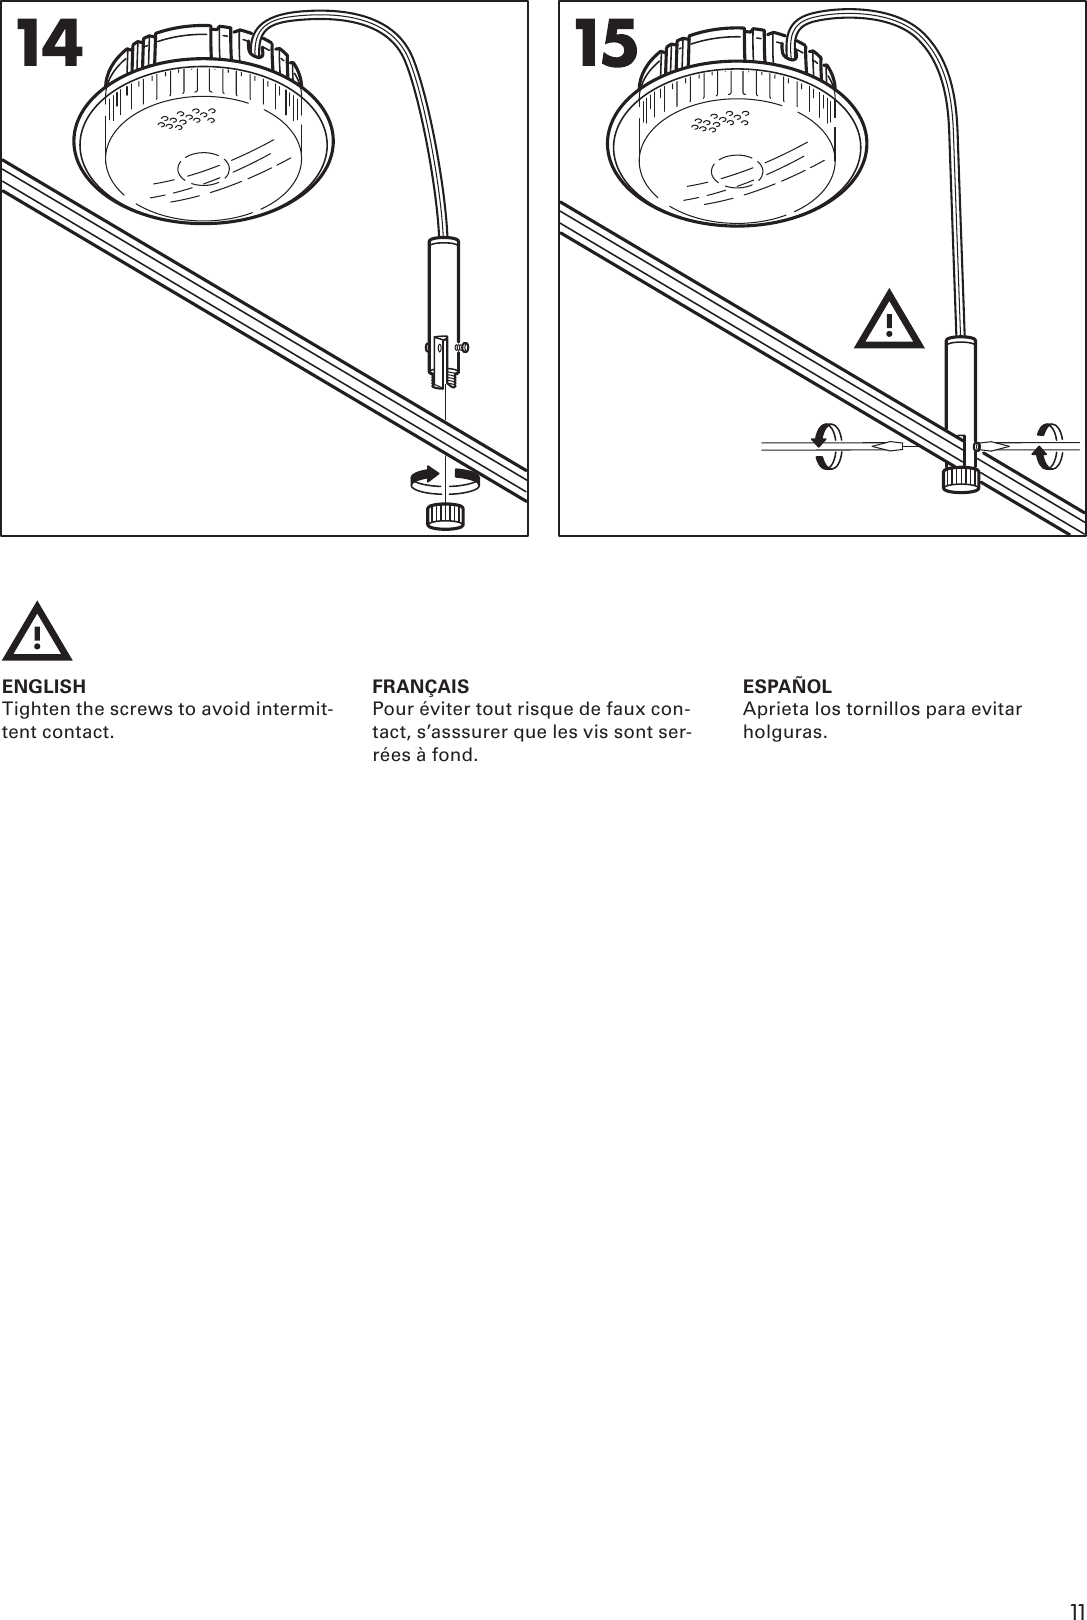 Page 11 of 12 - Ikea Ikea-Magnesium-Spotlight-System-Assembly-Instruction